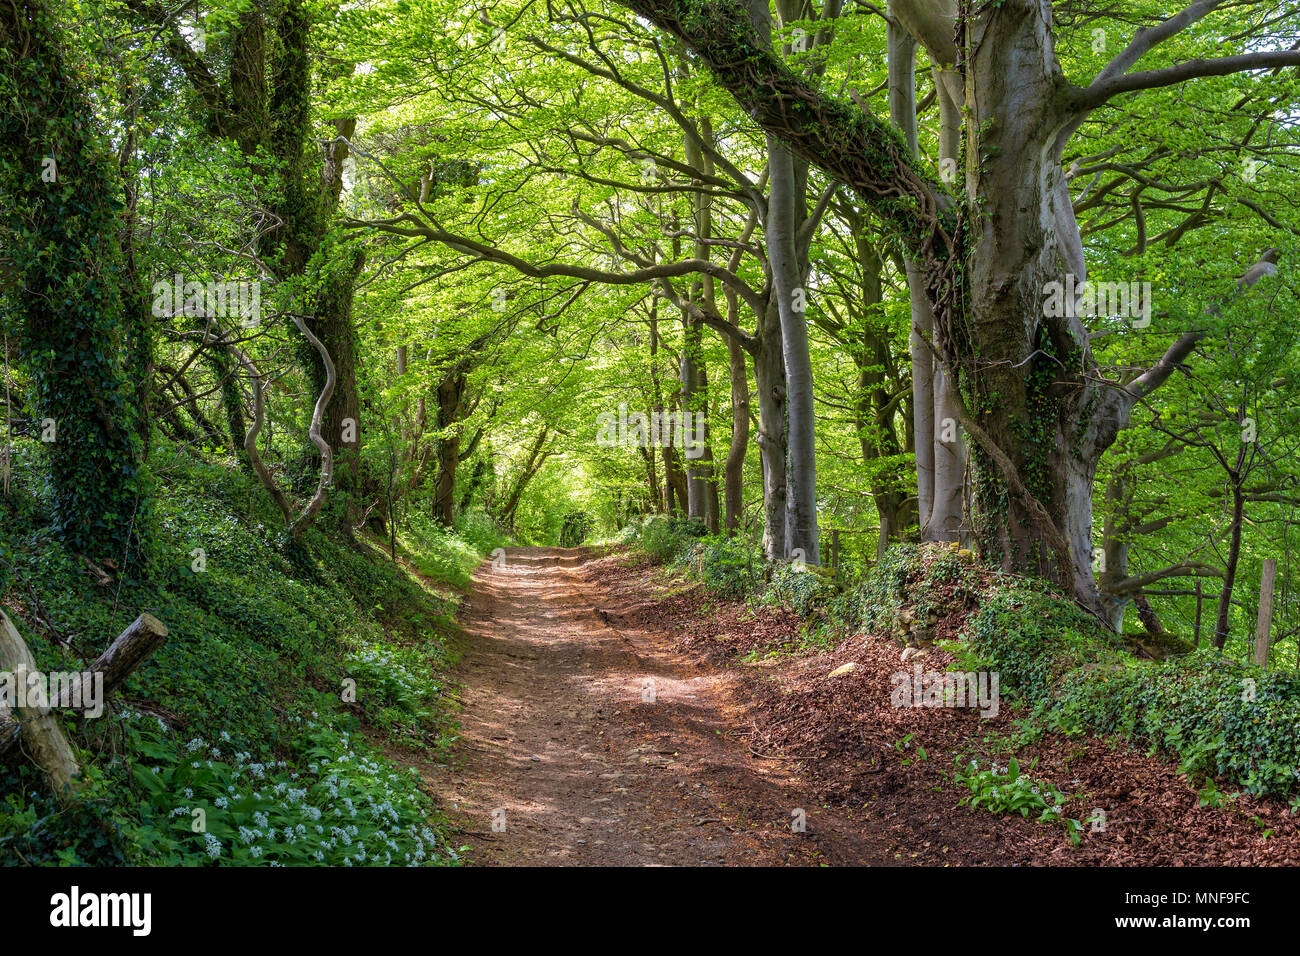 A wooded trail near Bath, England part of the Fosse Way which is an ancient Roman Road. Stock Photo